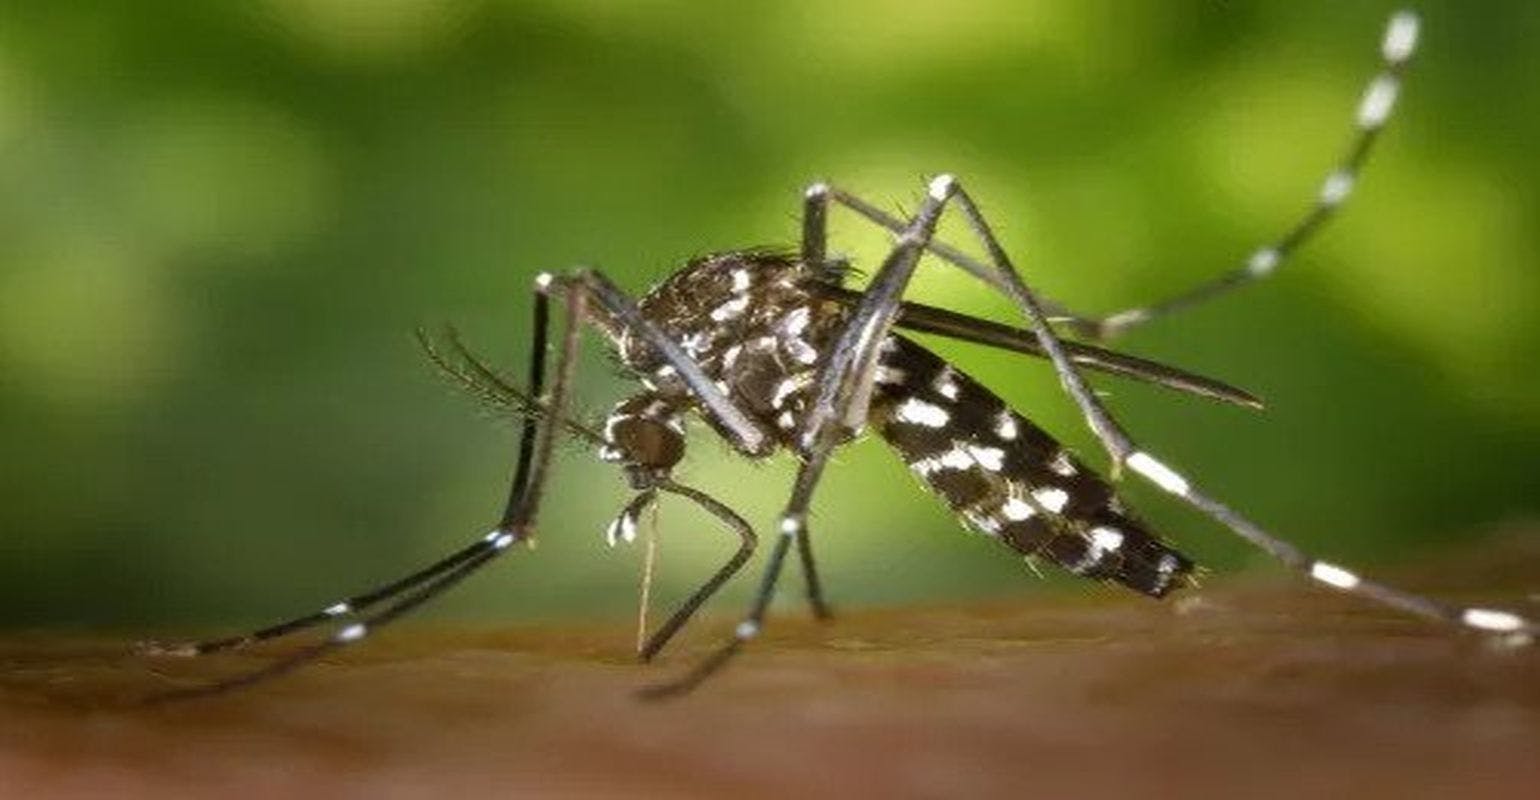 A Billion People Will Be Newly Exposed to Diseases Like Dengue Fever as World Temperatures Rise